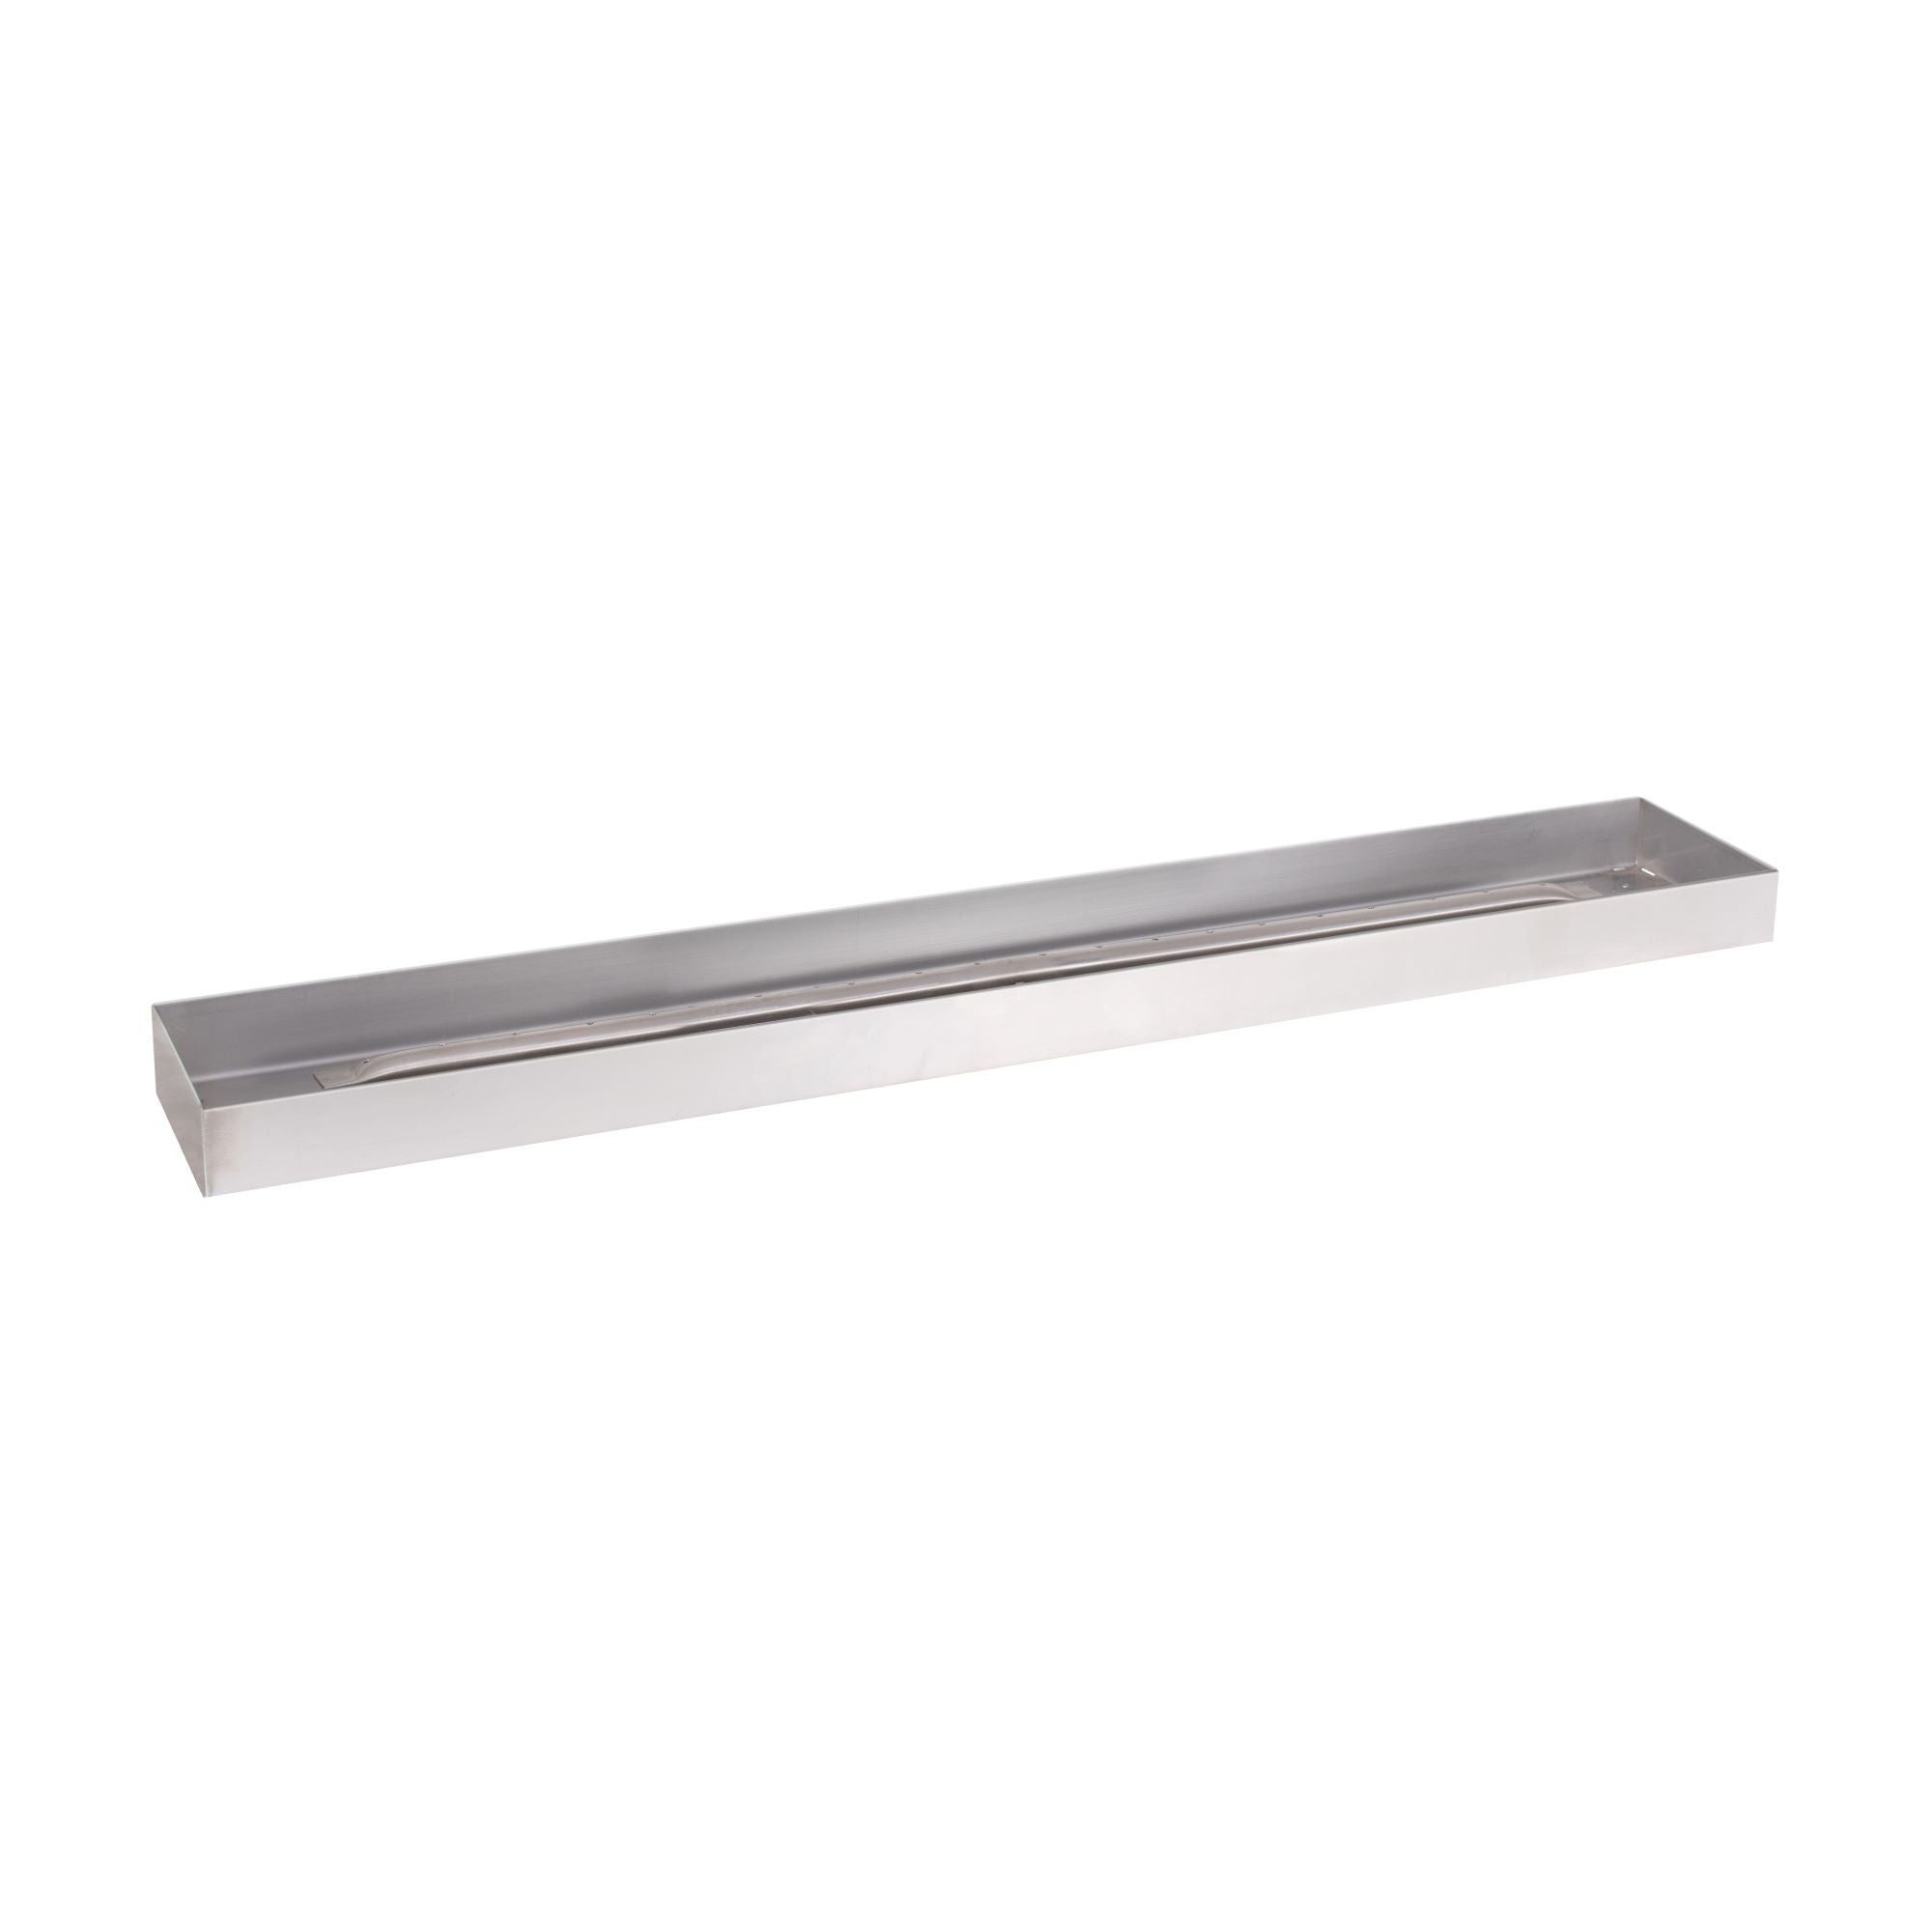 The Outdoor Plus Rectangular Lipless Drop-in Pan with Stainless Steel Linear Burner